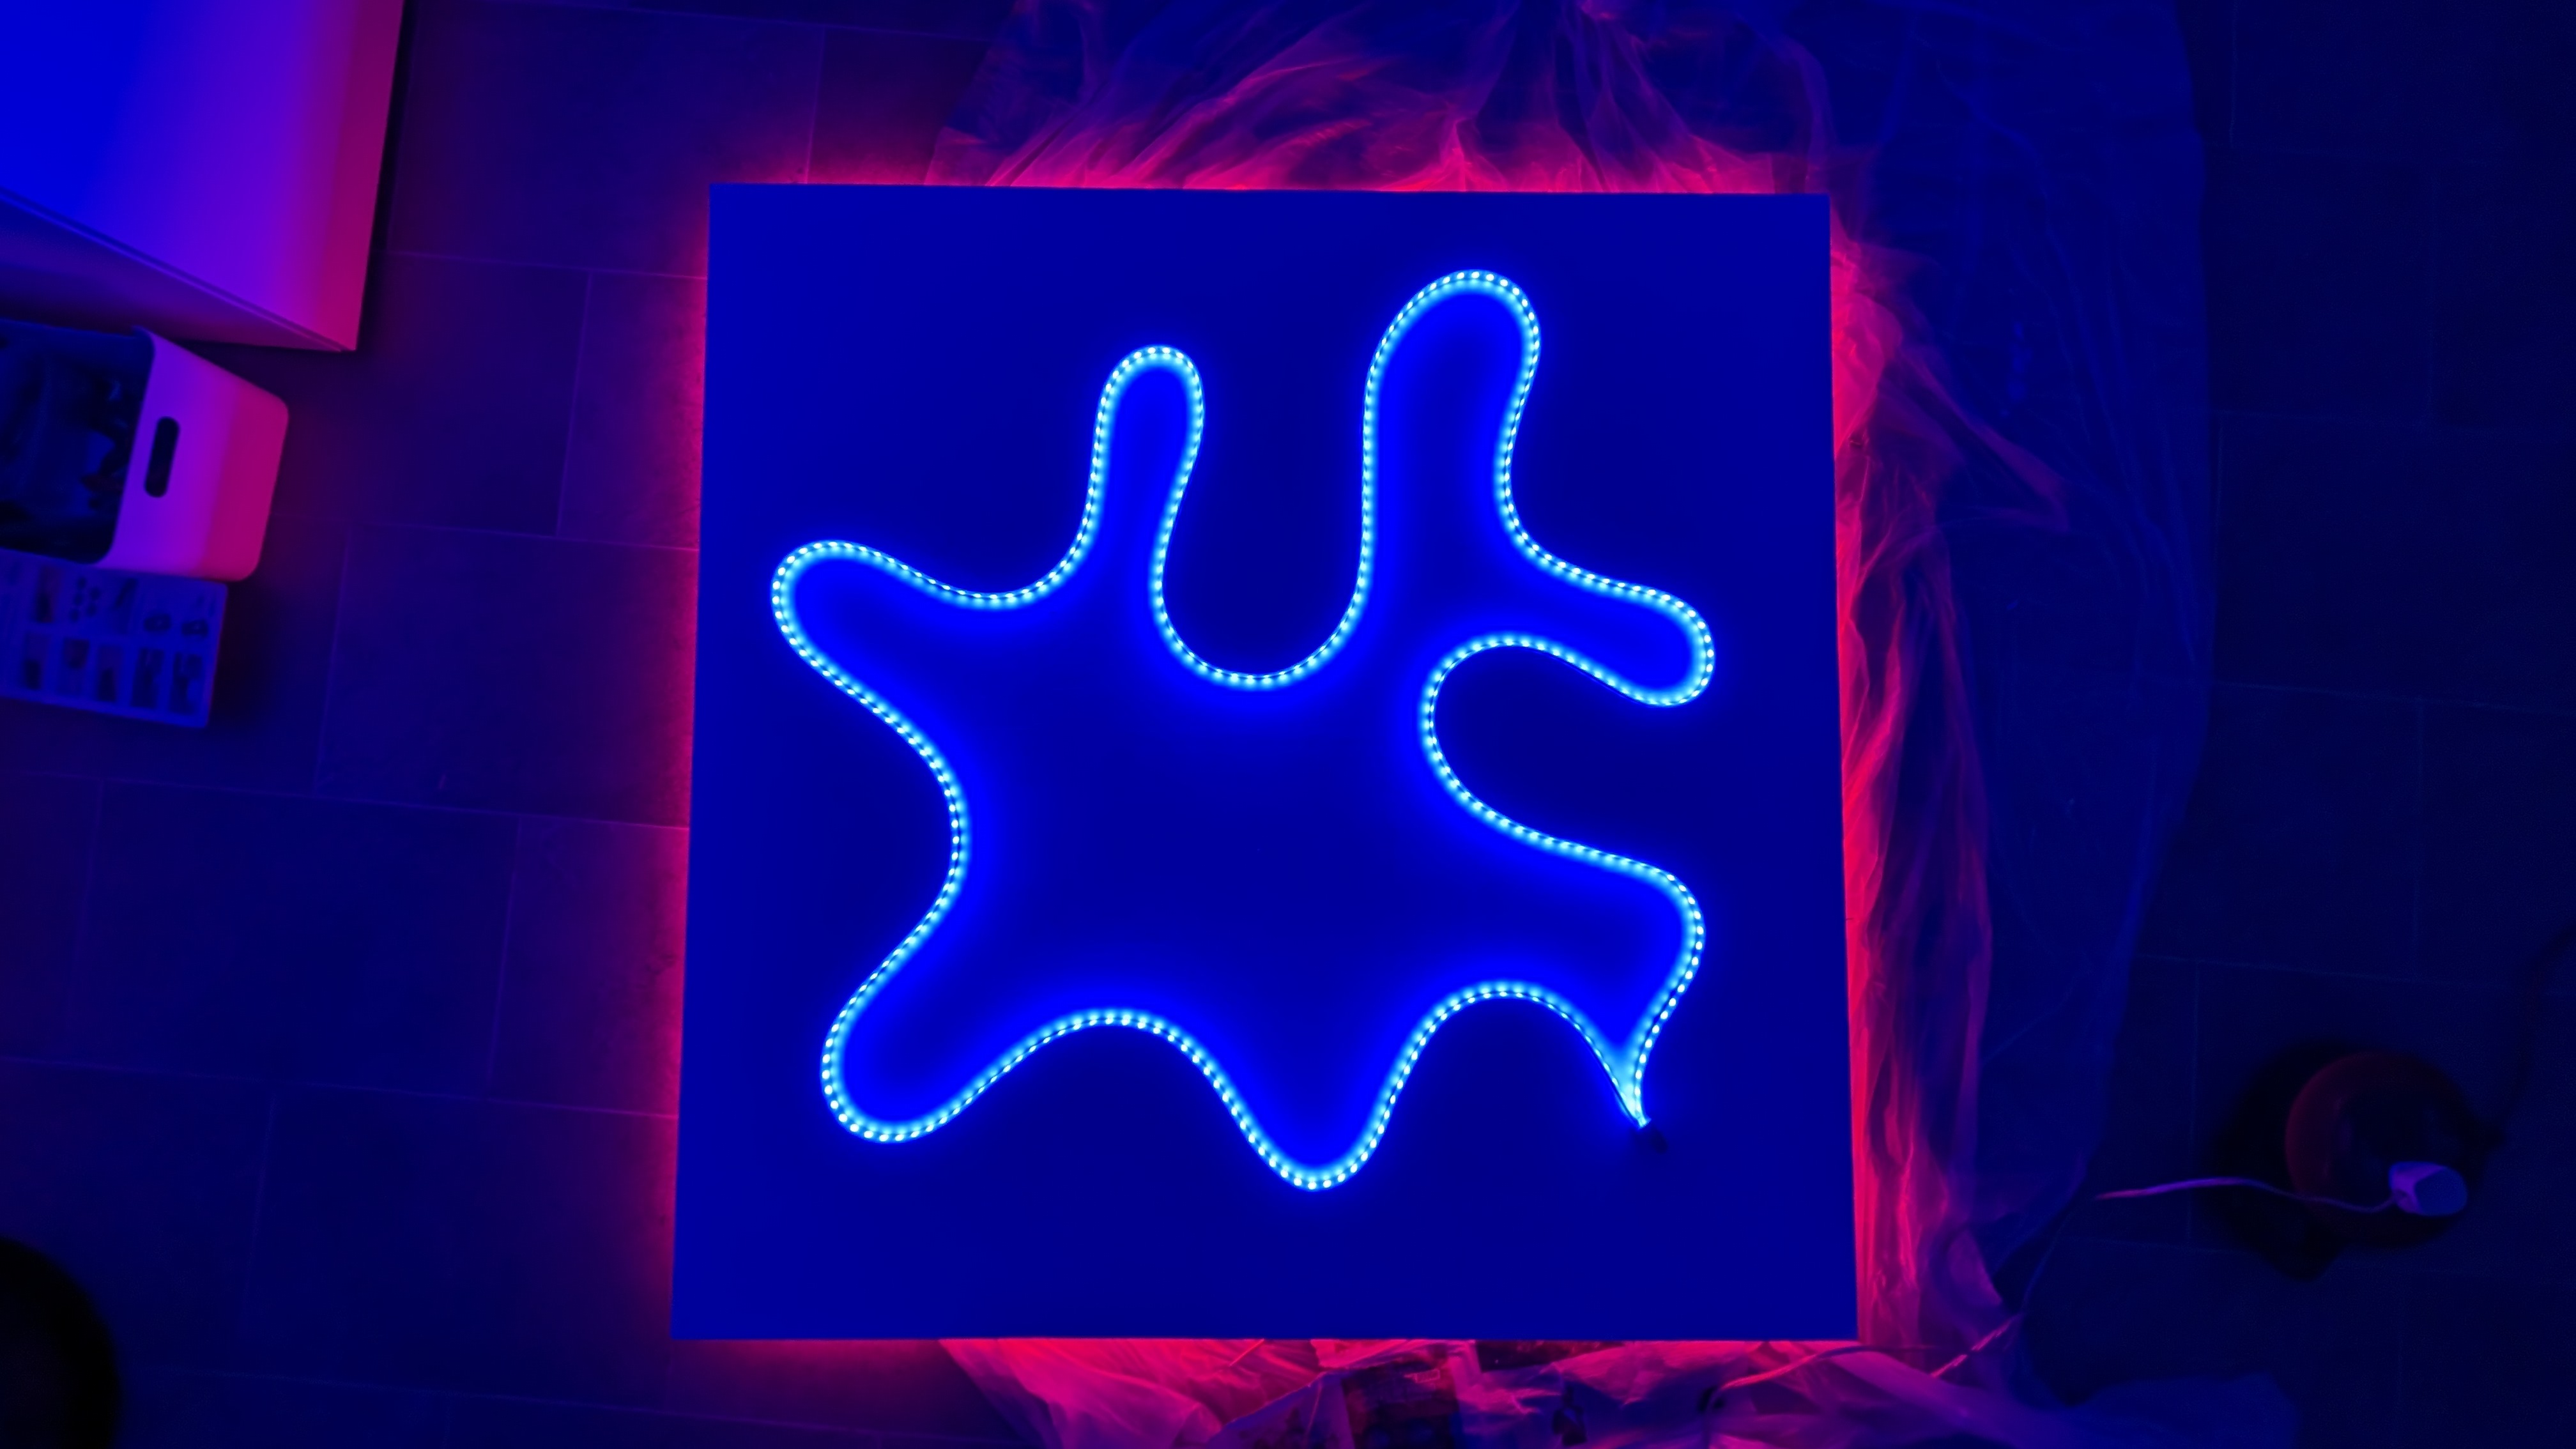 image from LED Art Project